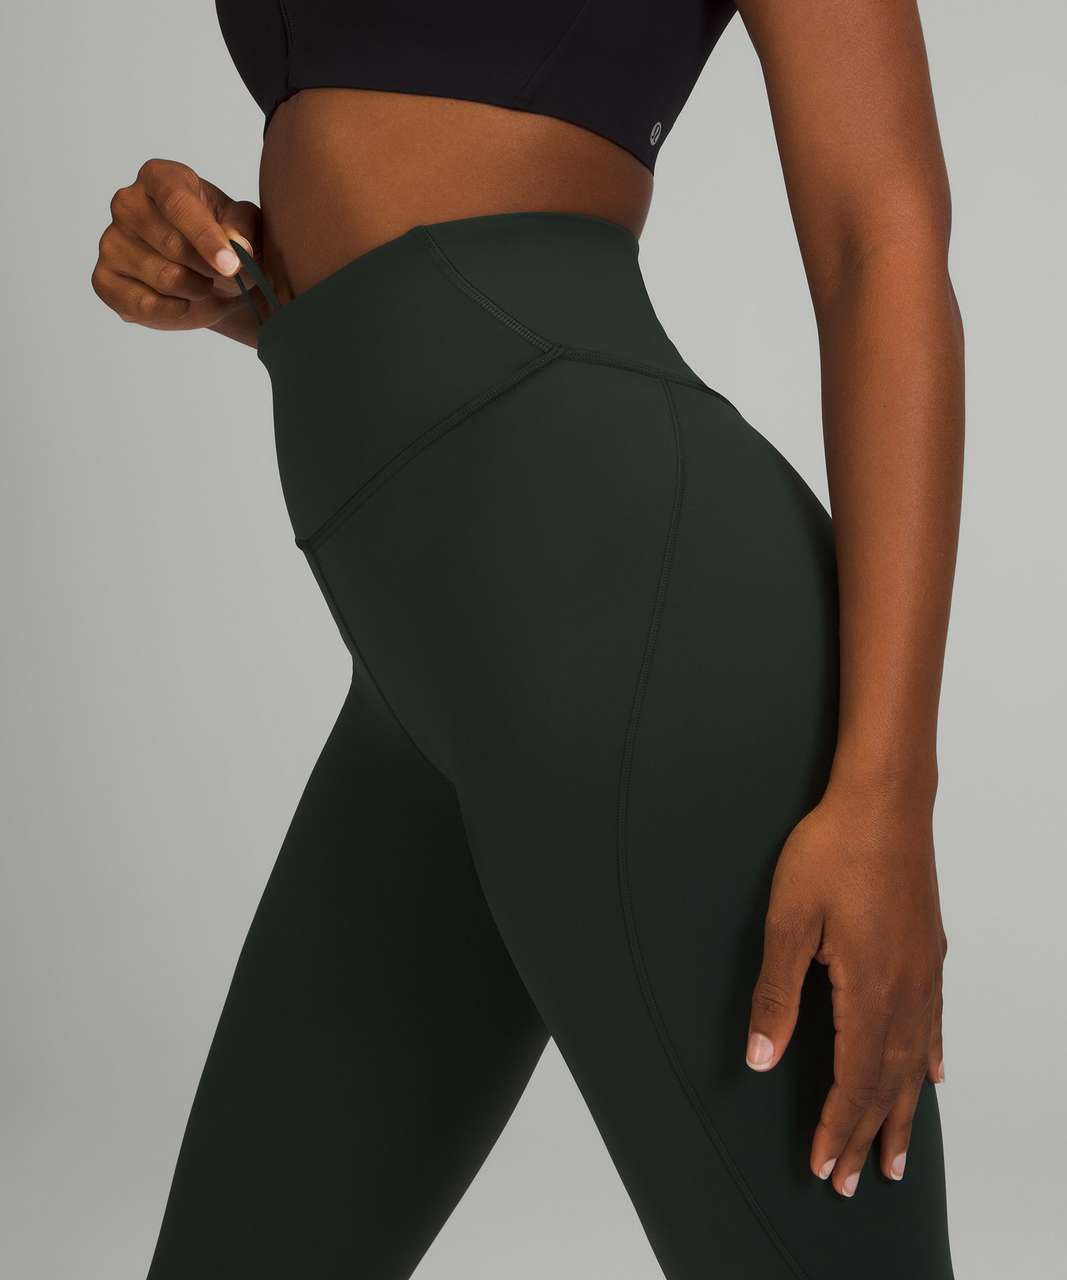 Lululemon Base Pace High-Rise Tight 28" *Brushed - Rainforest Green